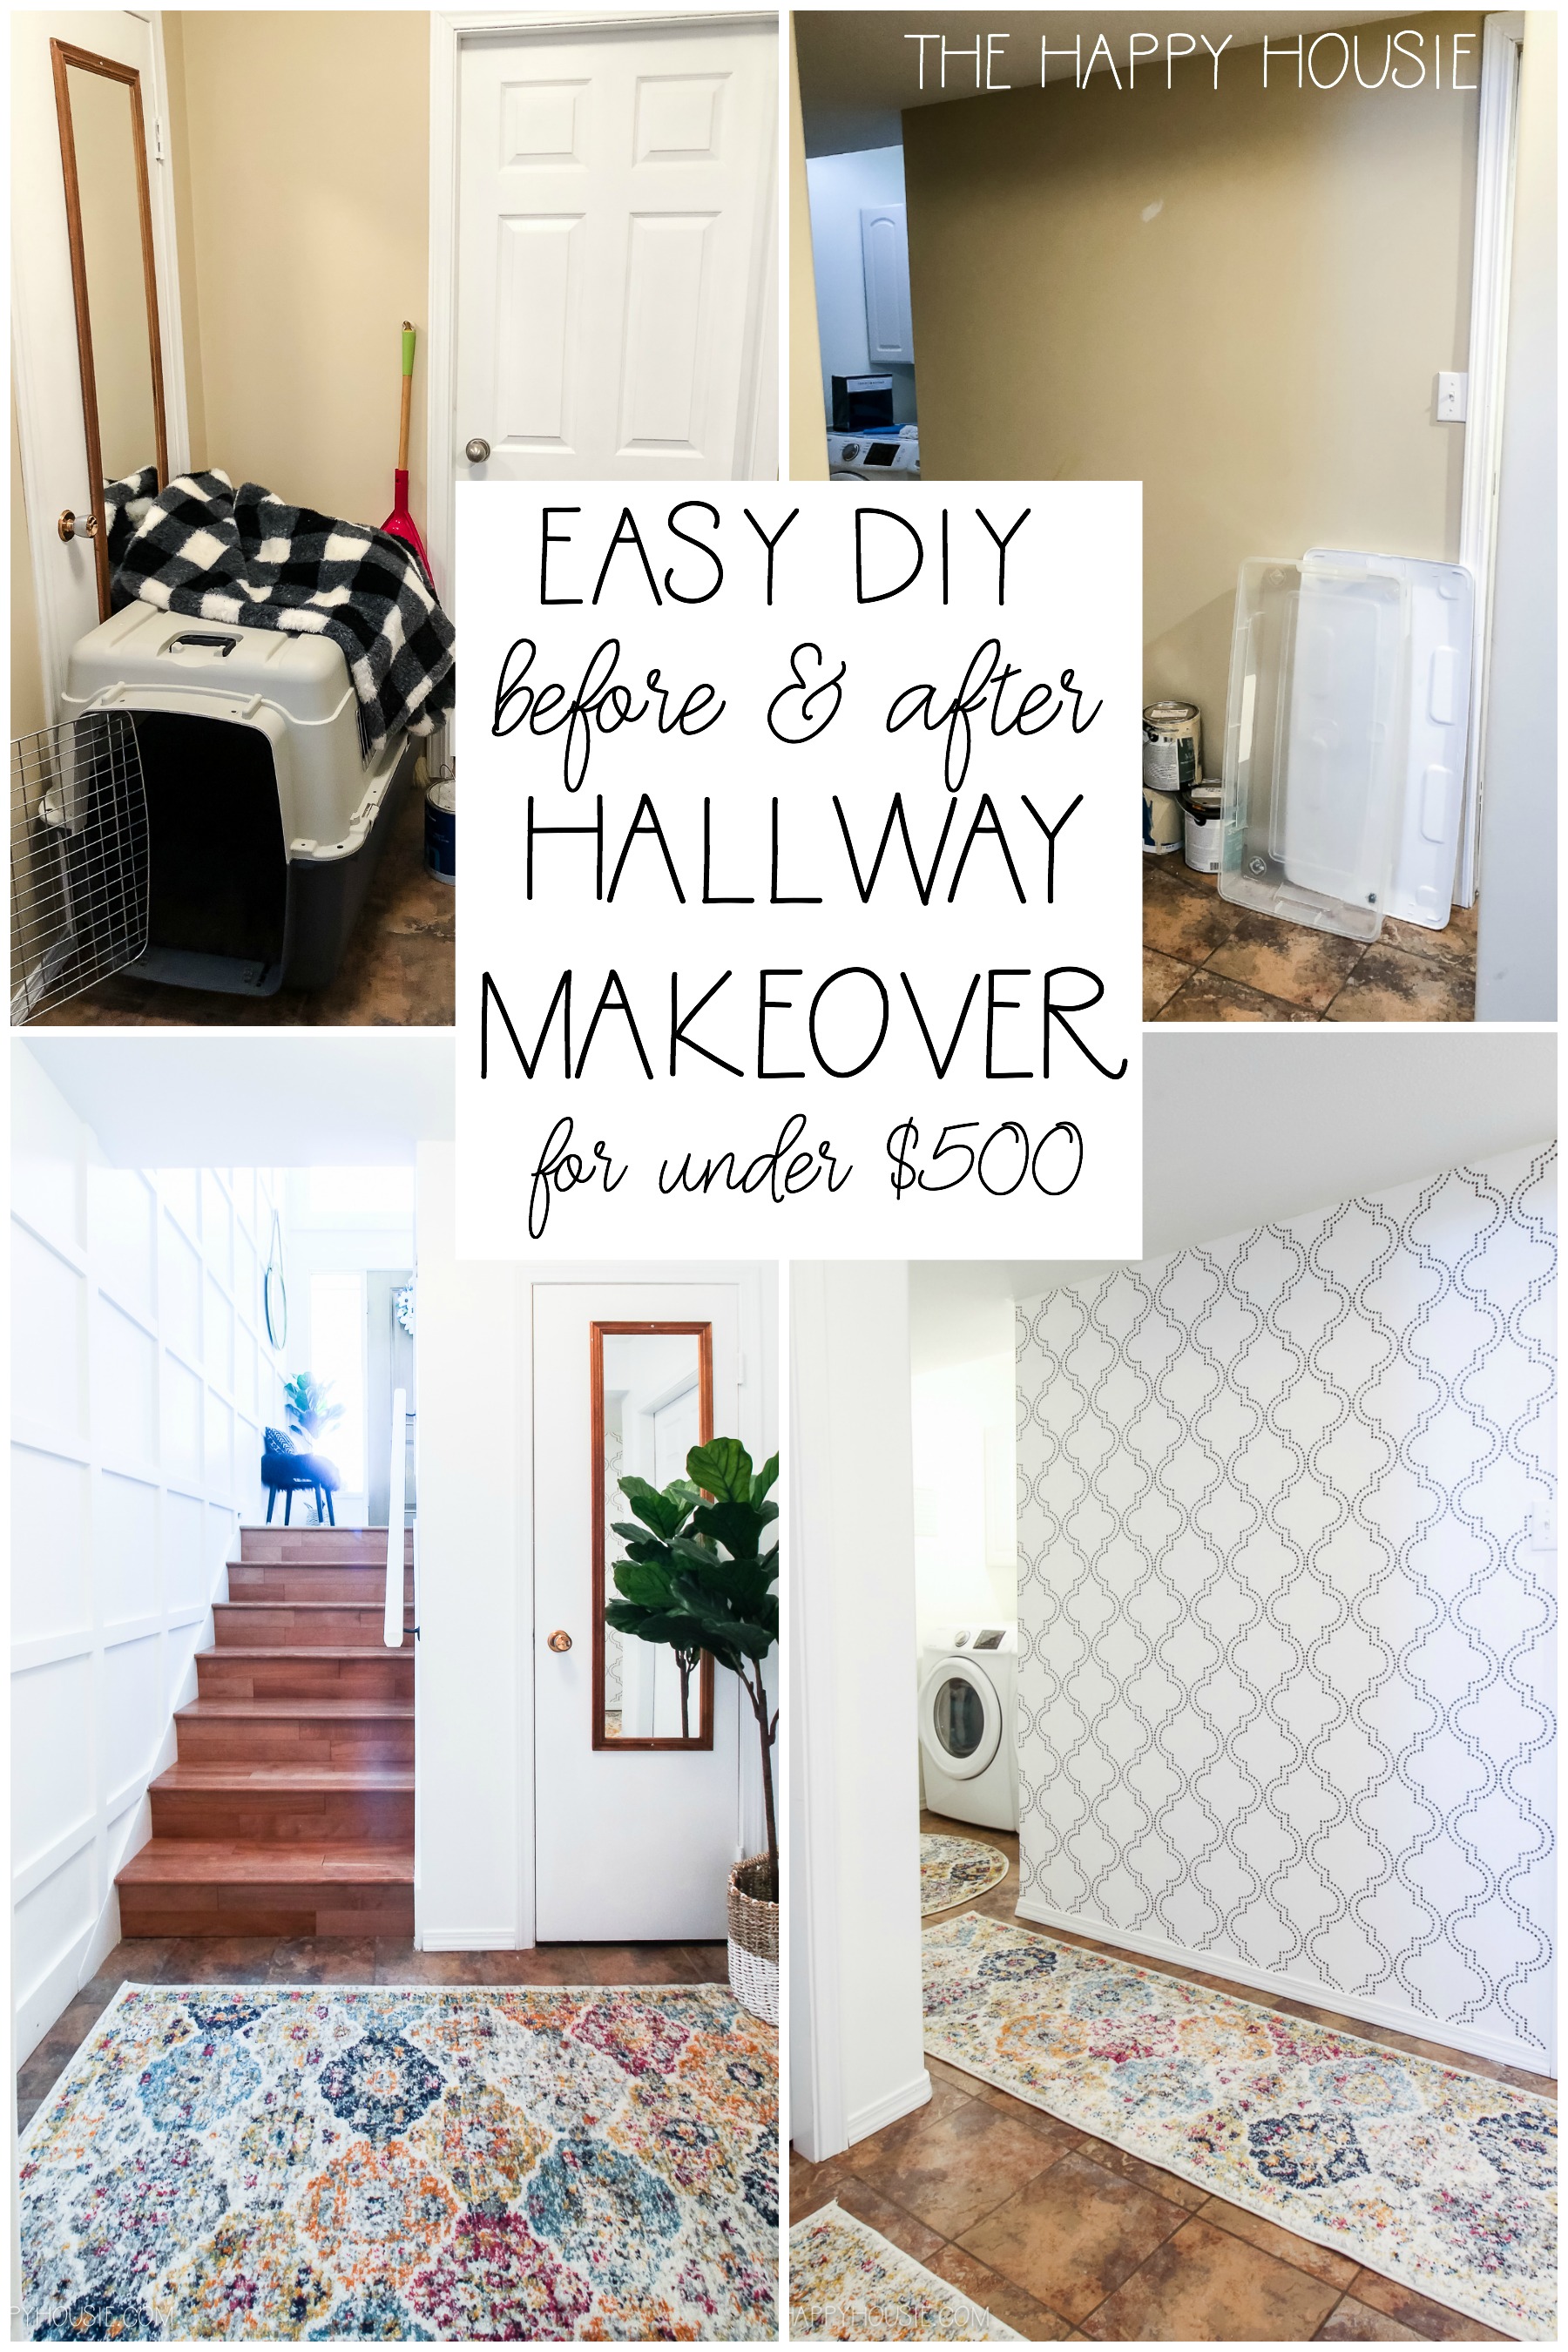 Easy DIY before and after hallway makeover for under $500.00 graphic.